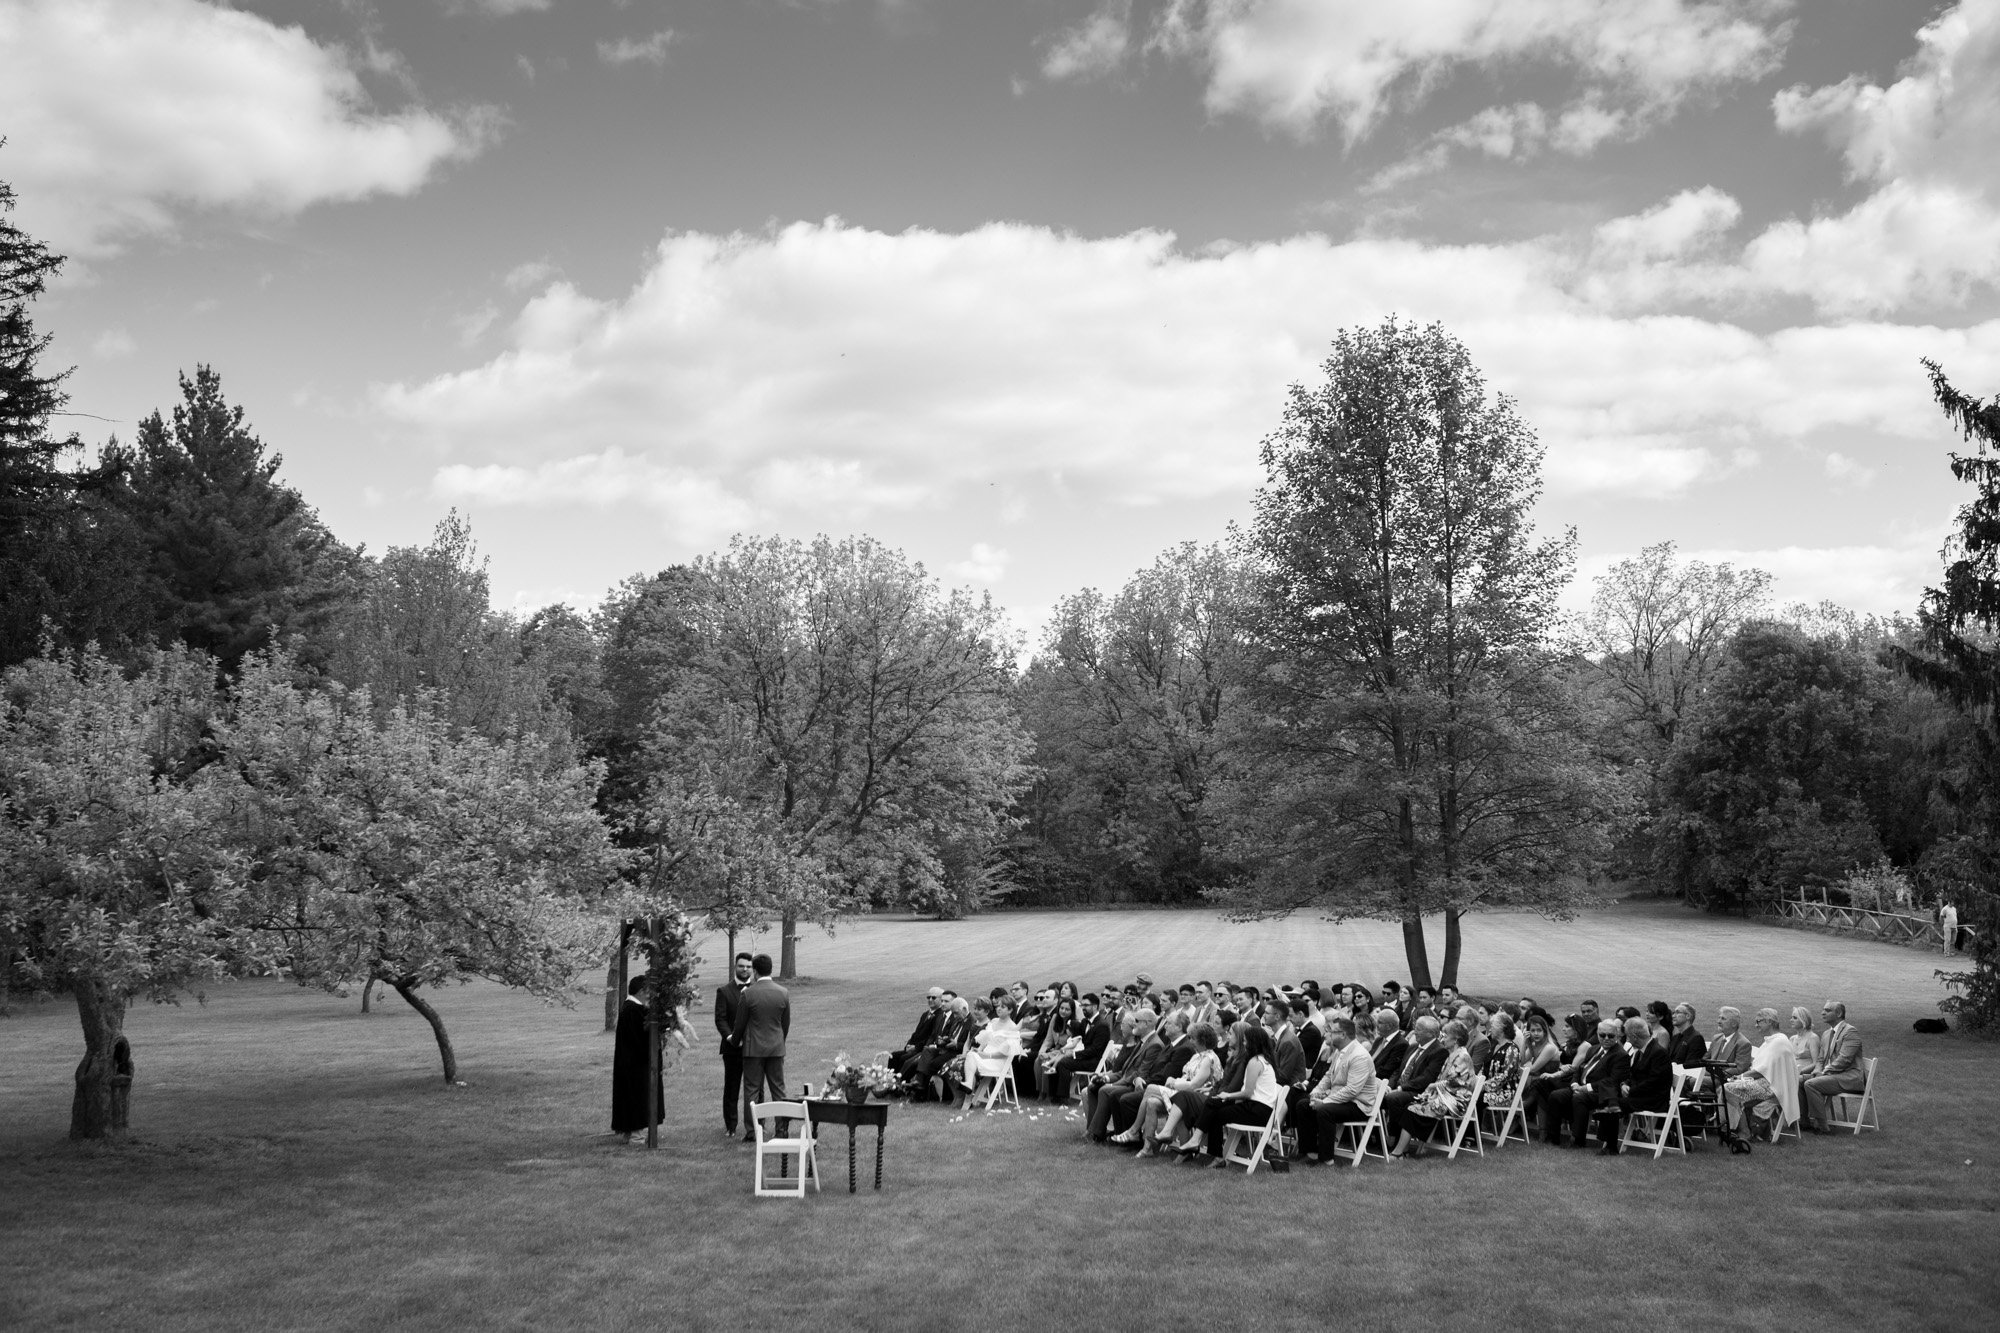  A black and white candid wedding photograph of Greg and Damon’s wedding ceremony at the Orchard lawn on the grounds of Langdon Hall   Photograph by Toronto wedding photographer Scott Williams (www.scottwilliamsphotographer.com) 